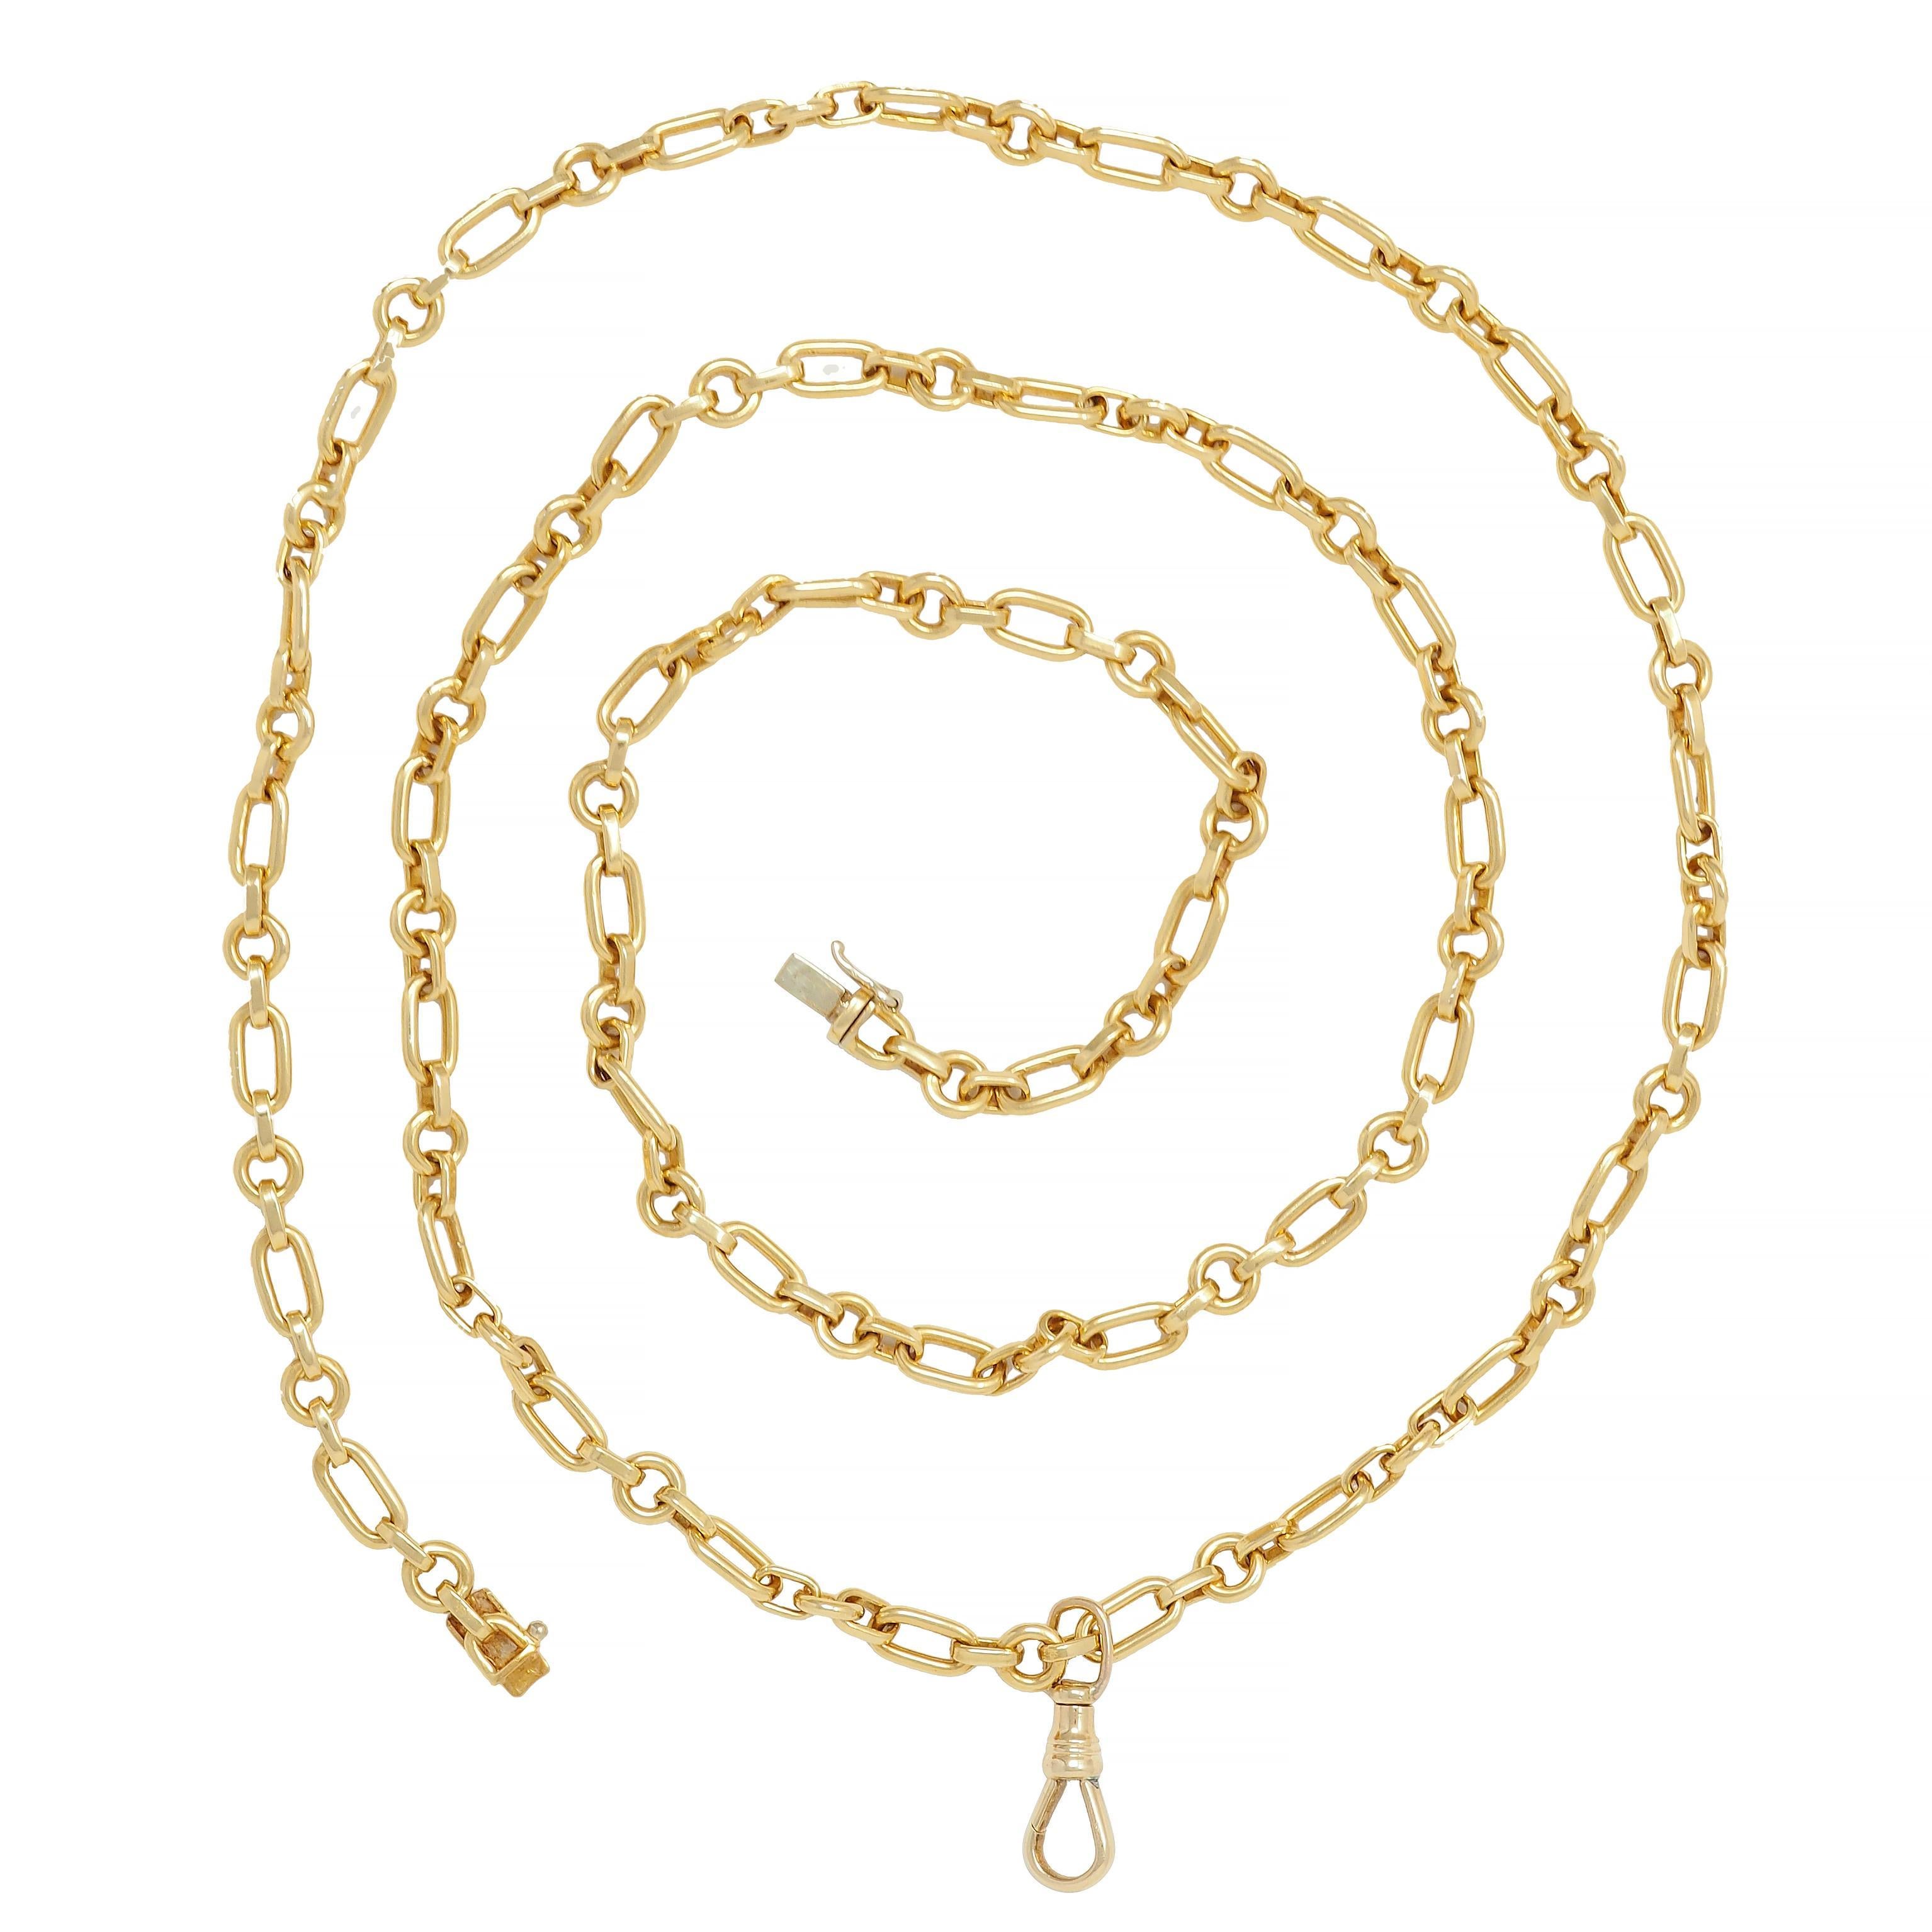 Designed as a stylized paperclip-style chain with alternating round and oval links 
Connected via flat bar links and suspending an antique-style fob bale 
Competed by a concealed clasp closure
With figure eight safety 
Chain is stamped with Italian